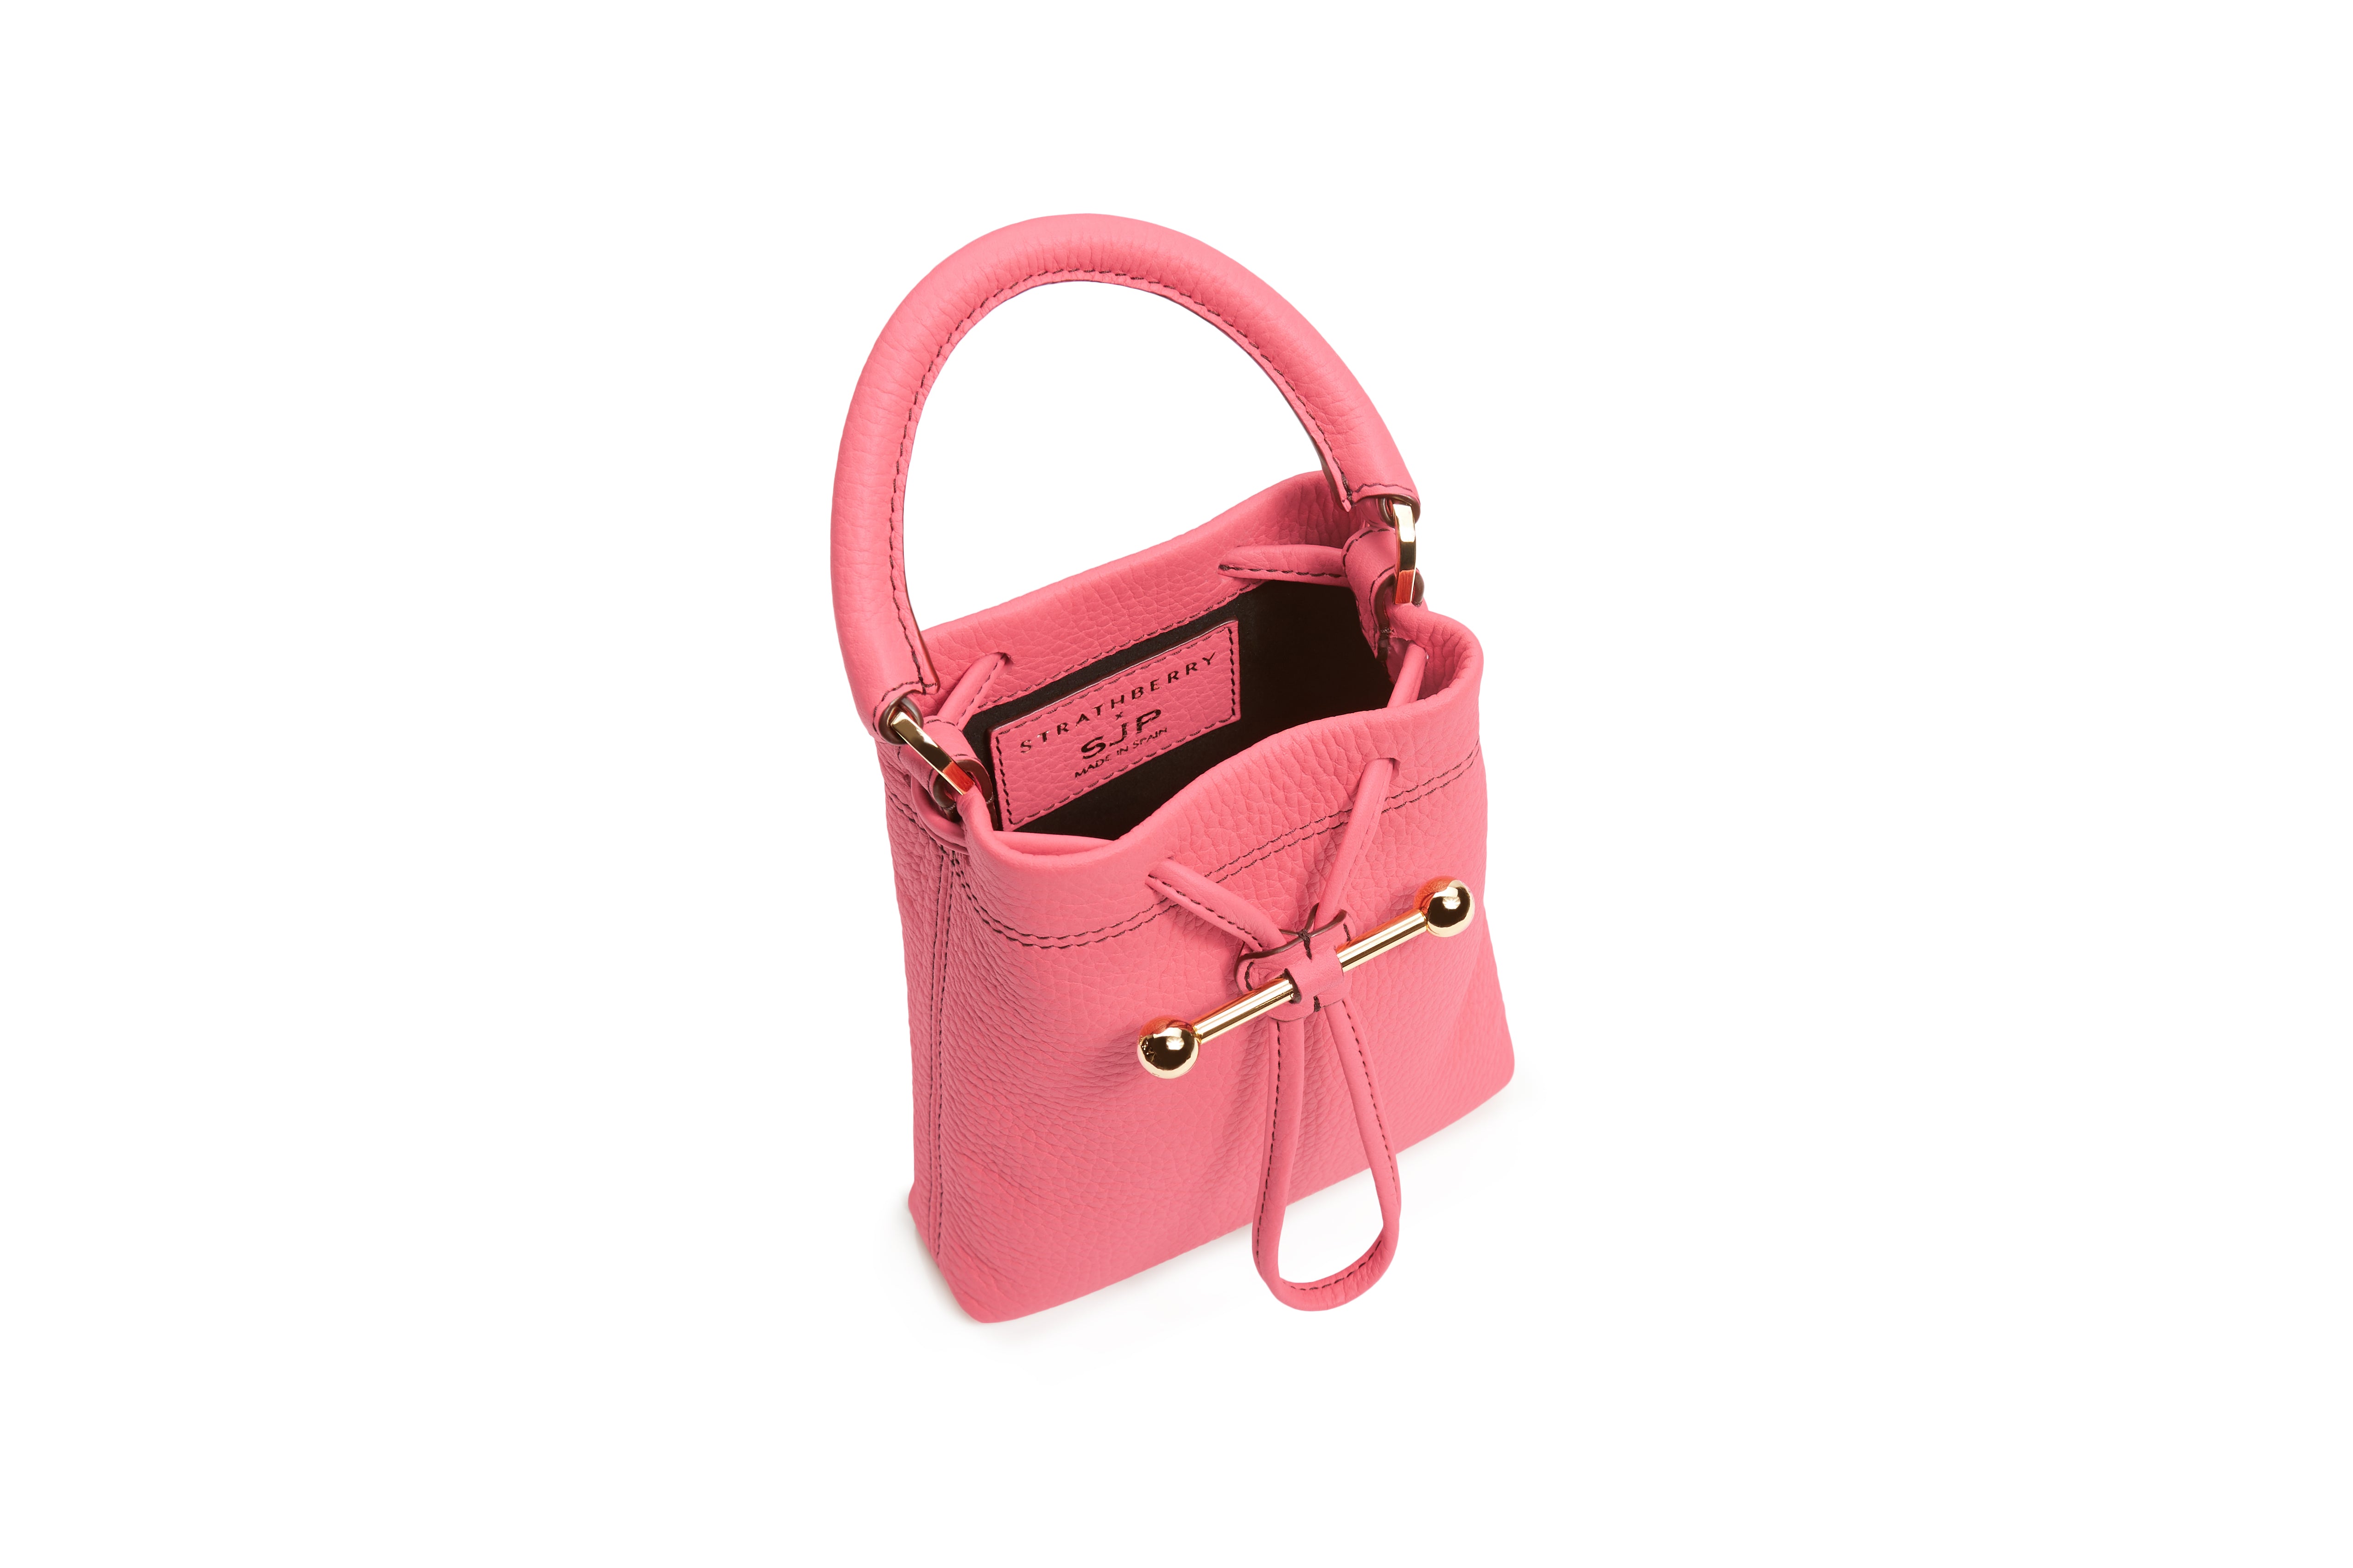 SJP by Sarah Jessica Parker Women's Leather City Osette Mini Strathberry Bag Pink